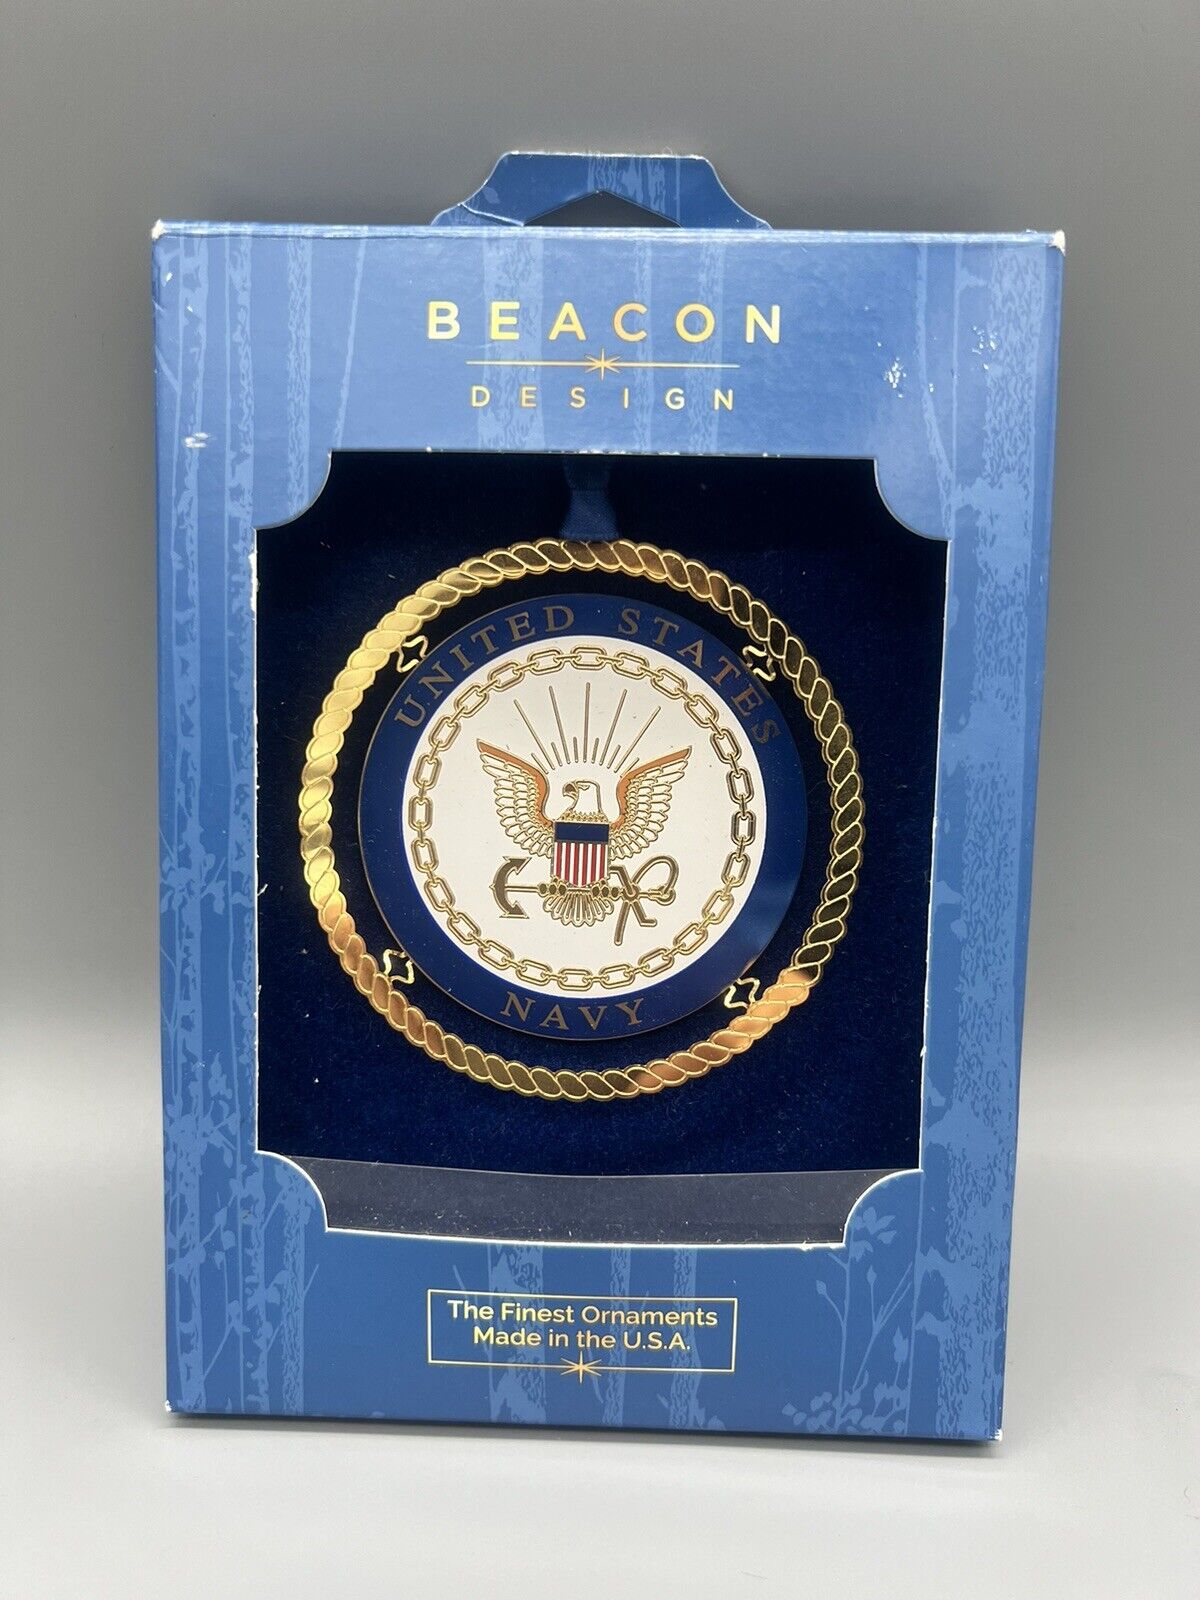 Beacon Design US Navy ornament pre-owned